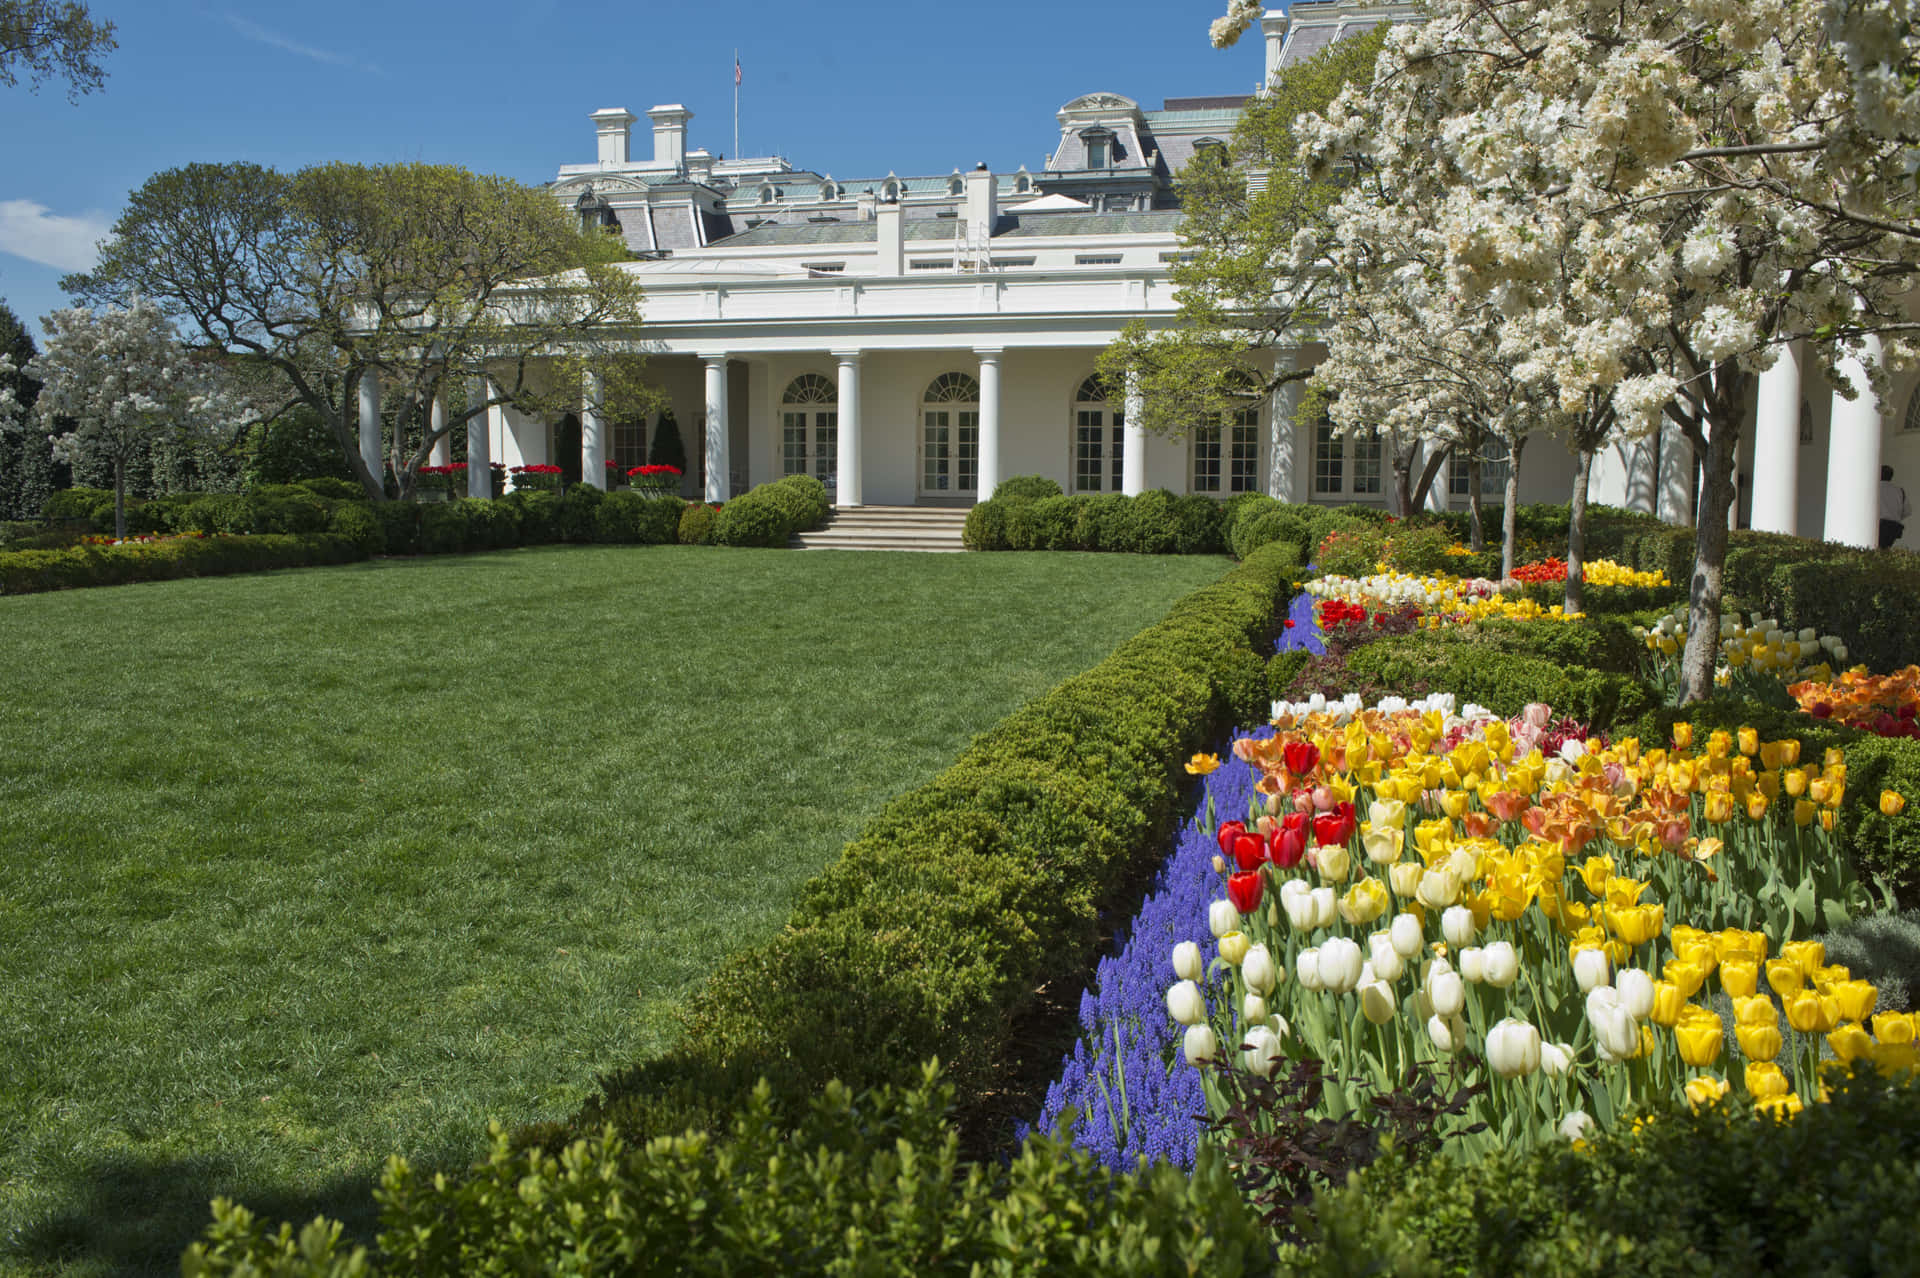 The White House Rose Garden, a symbol of national appreciation for beauty and peace